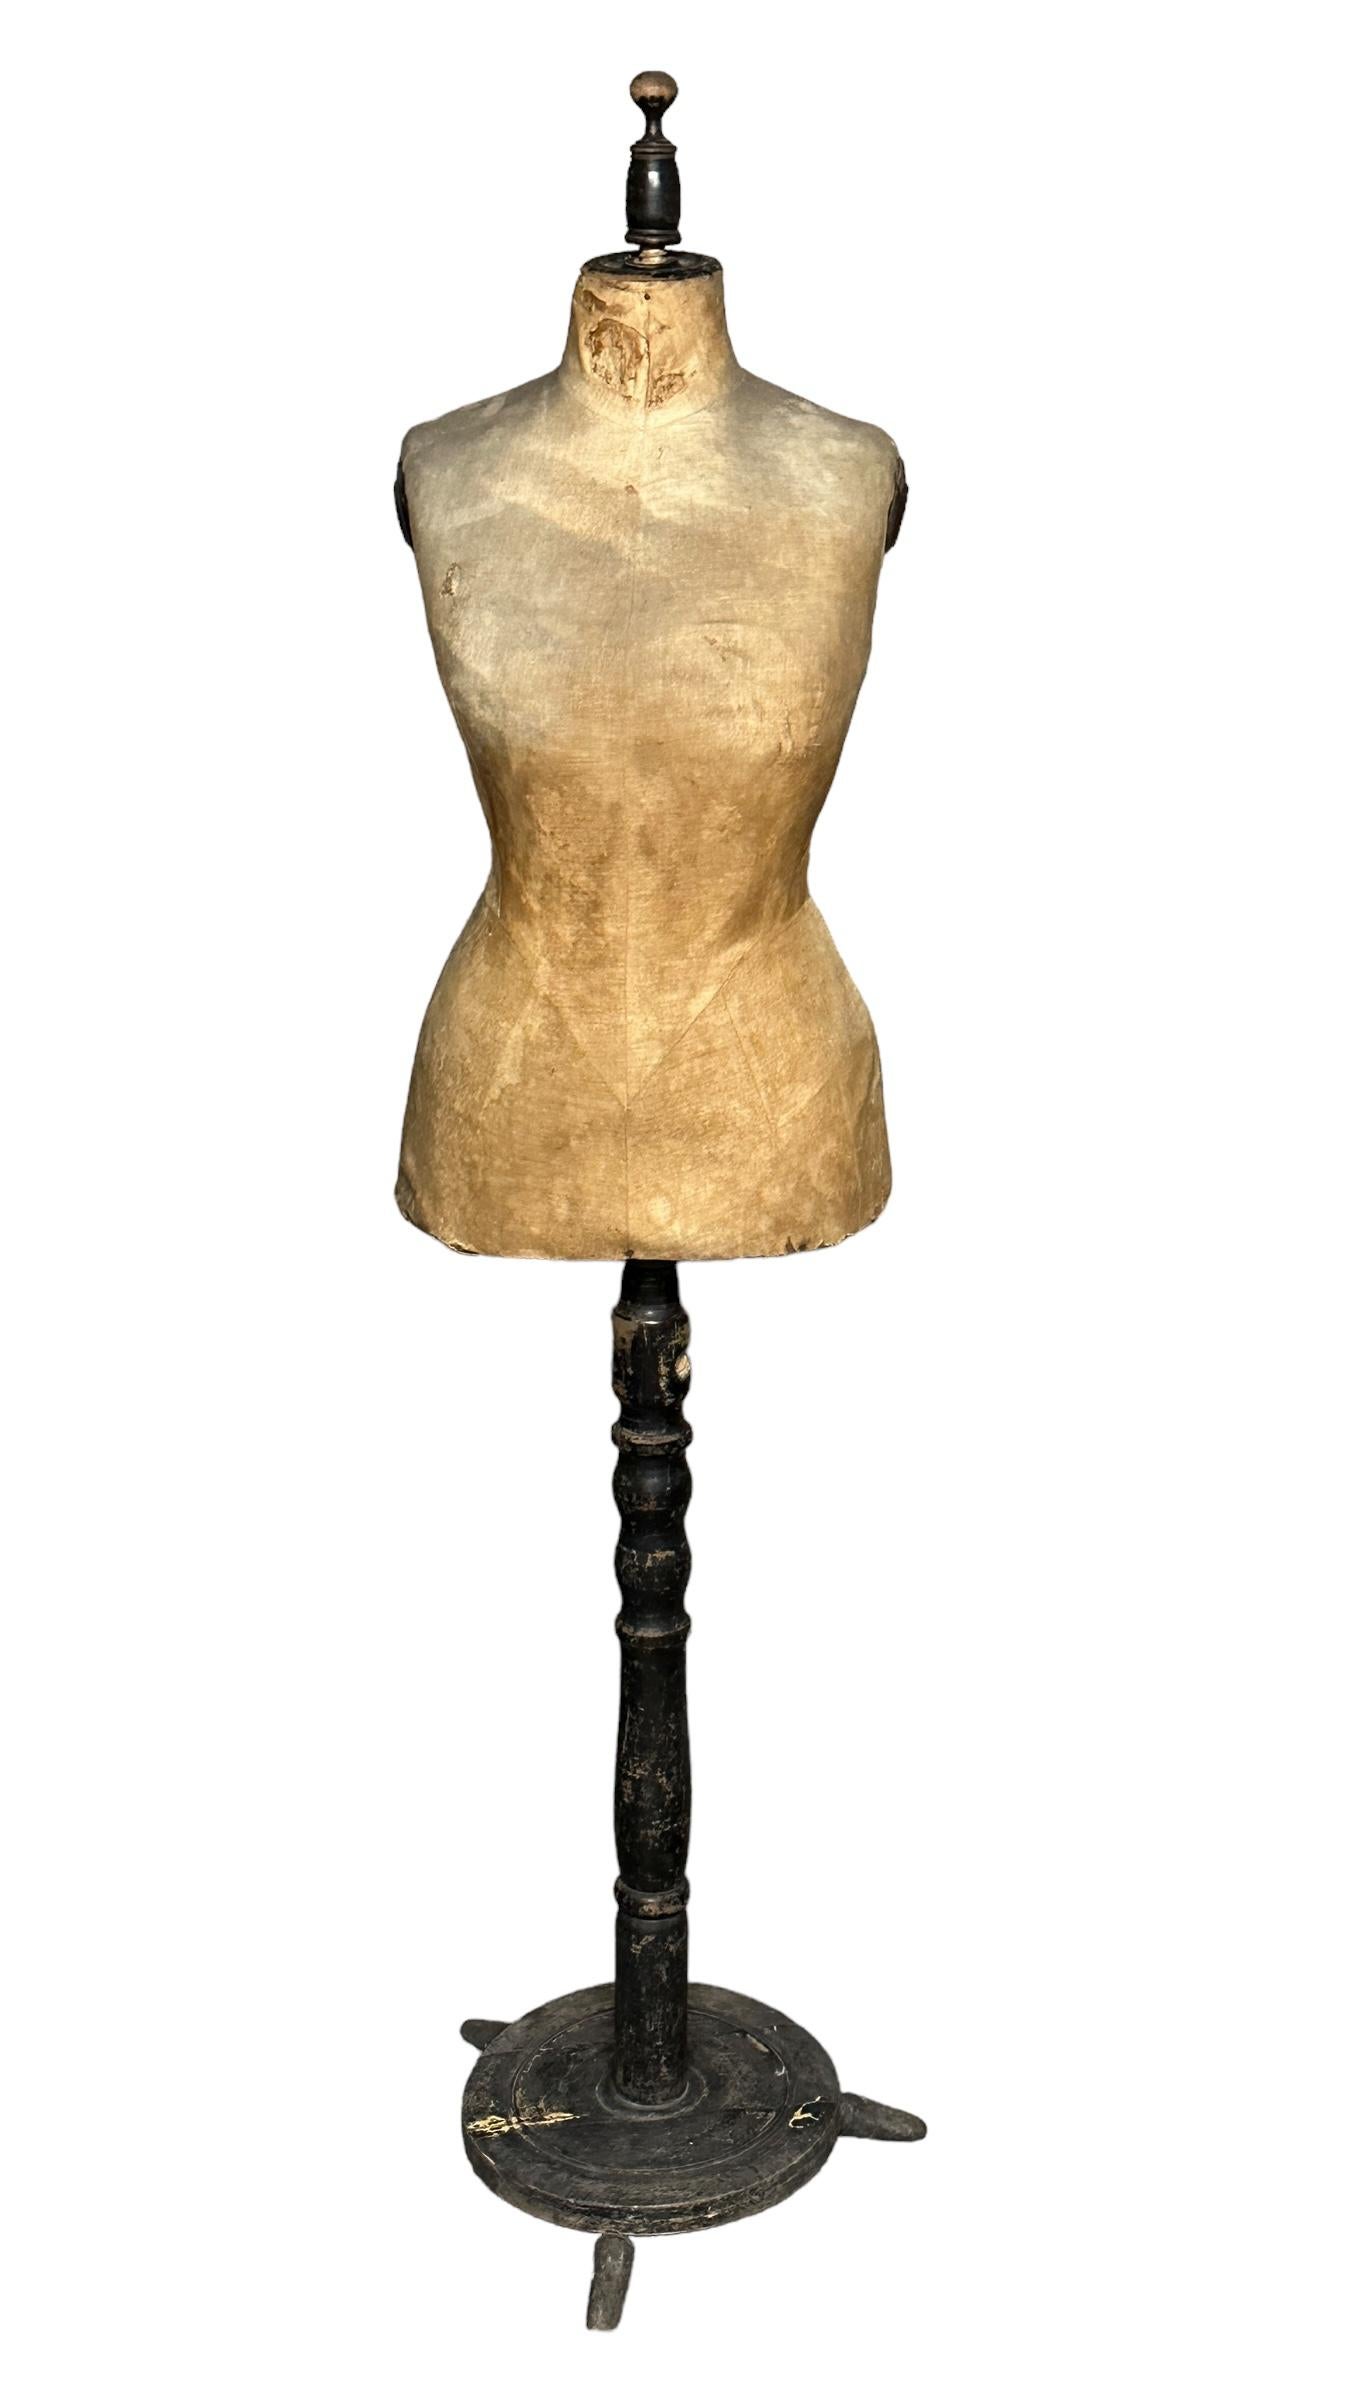 A great looking originally used by Austrian tailors and dressmakers for draping, alterations, and creating the latest fashion, this vintage dressmaker mannequin is also a great piece of decor. This adjustable height dress form has ebonized and